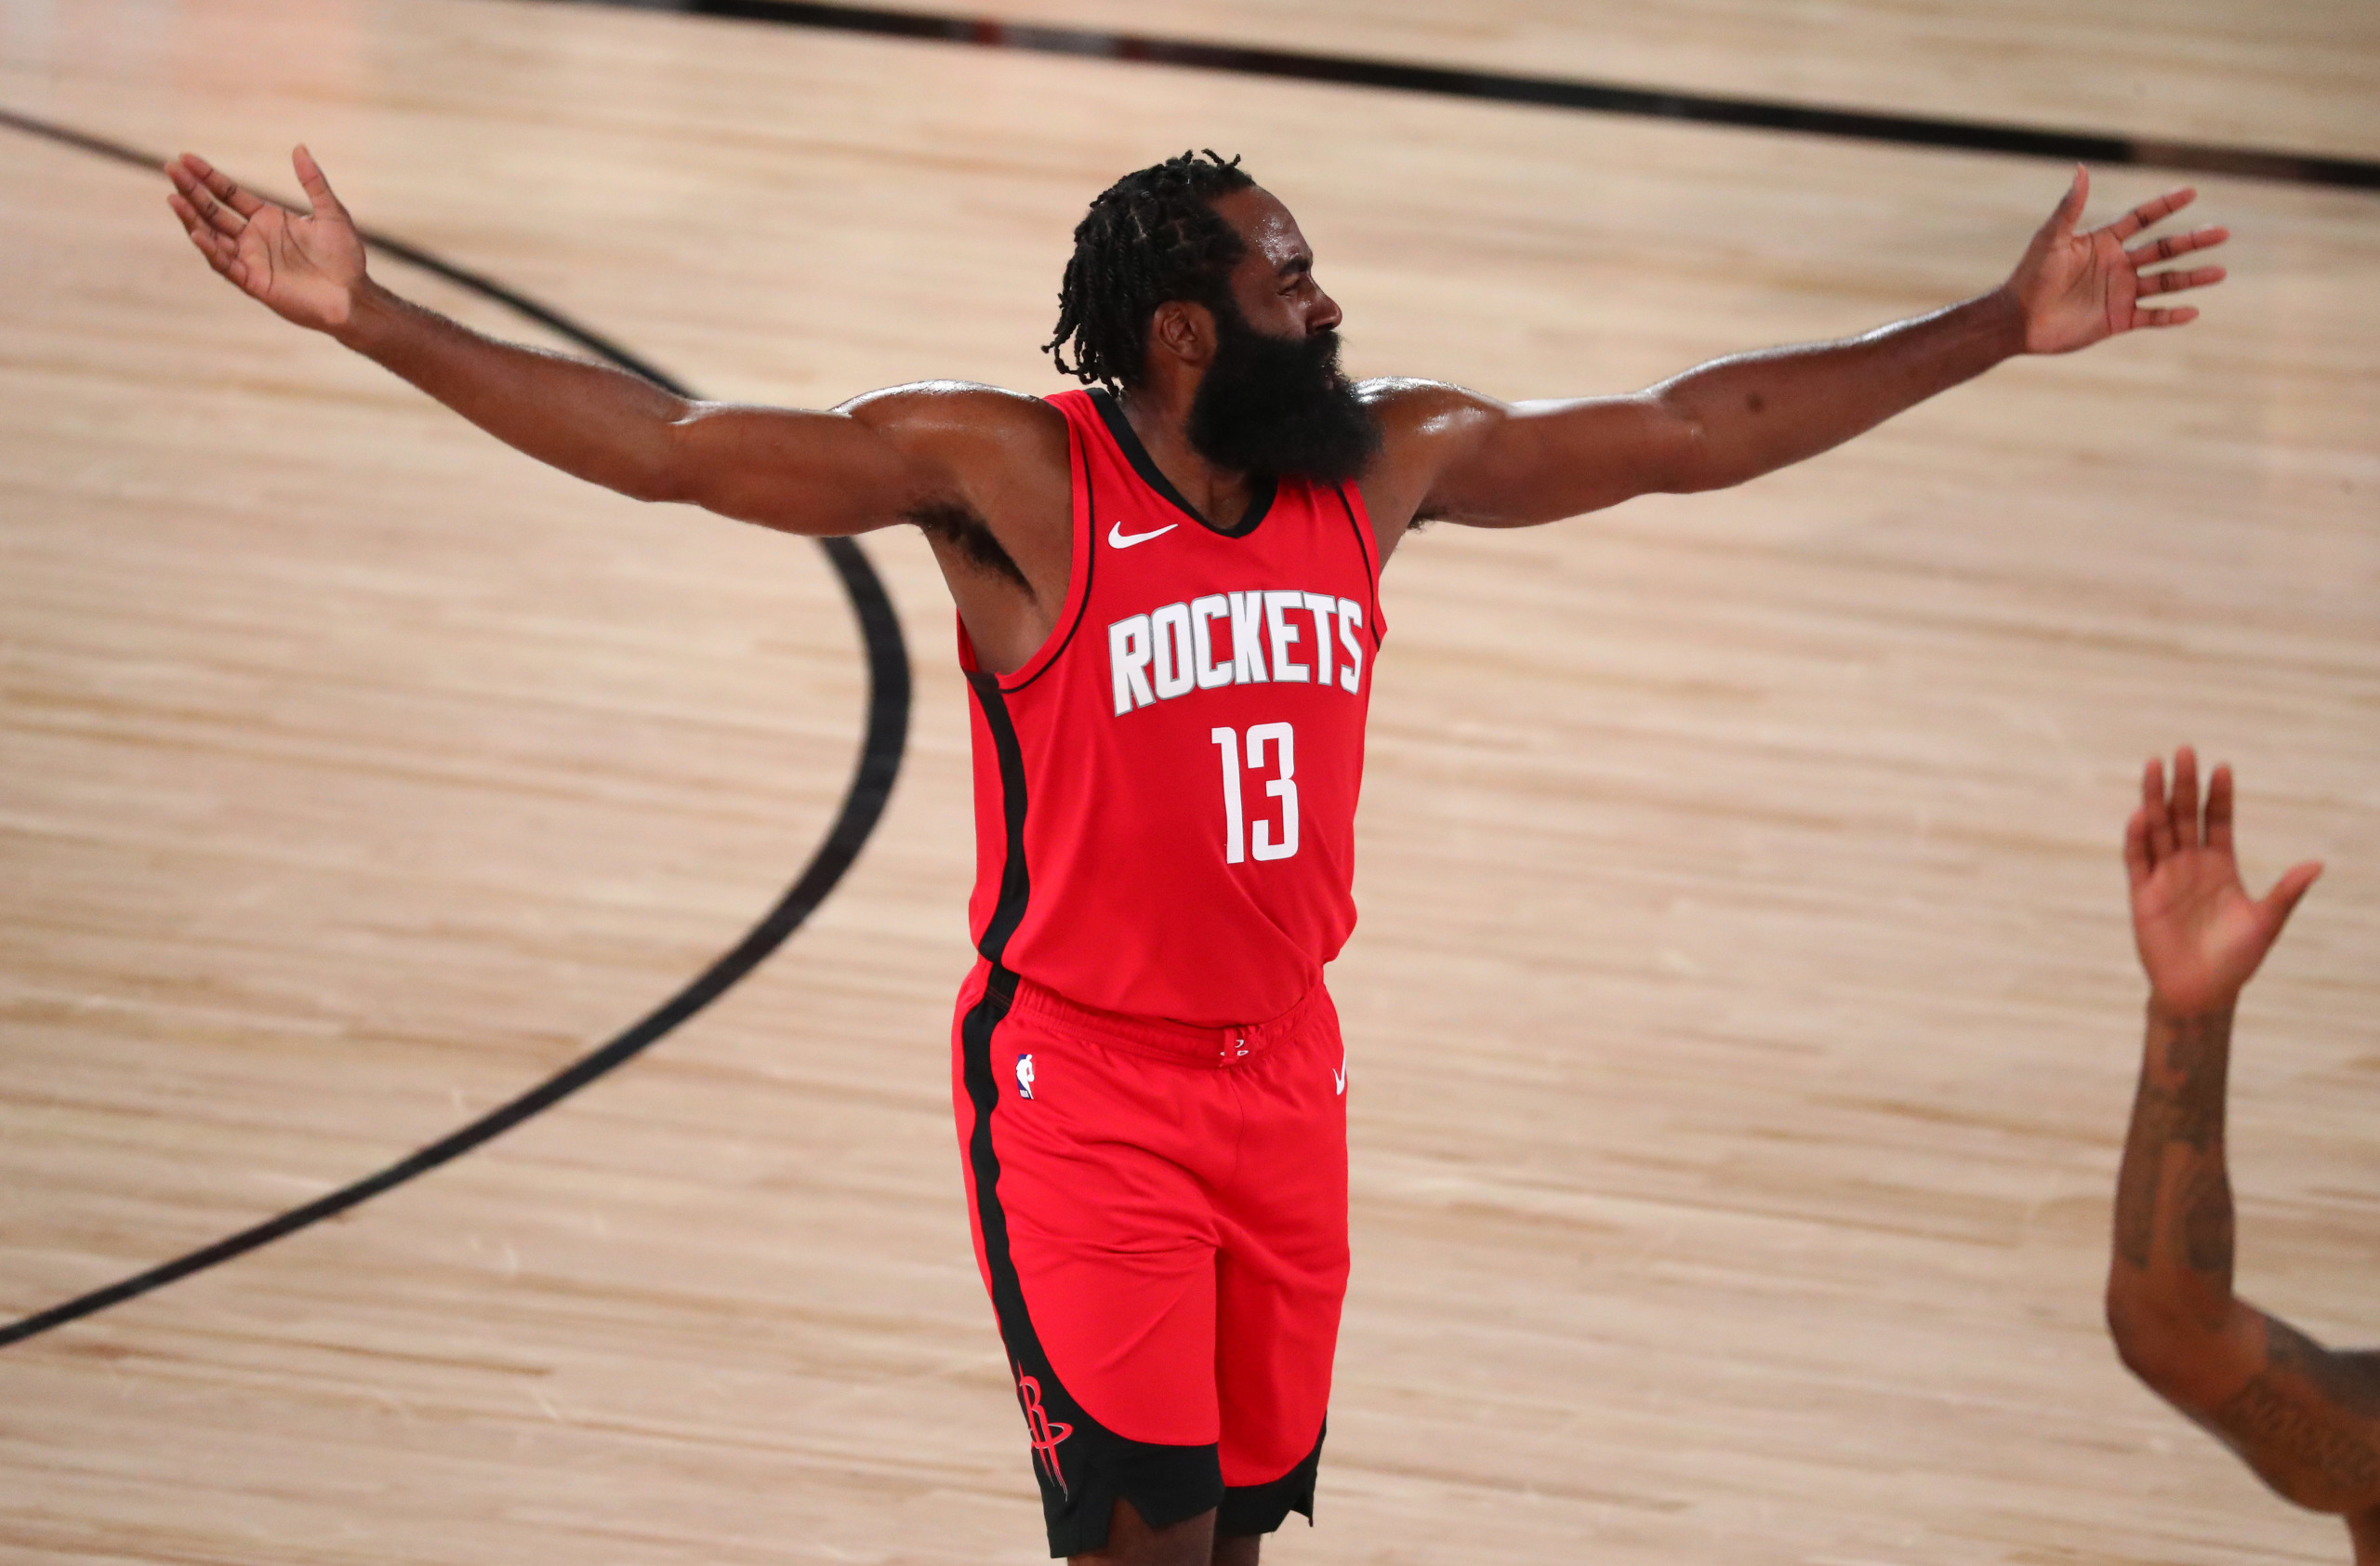 Houston Rockets see success in ticket sales and partnership in new